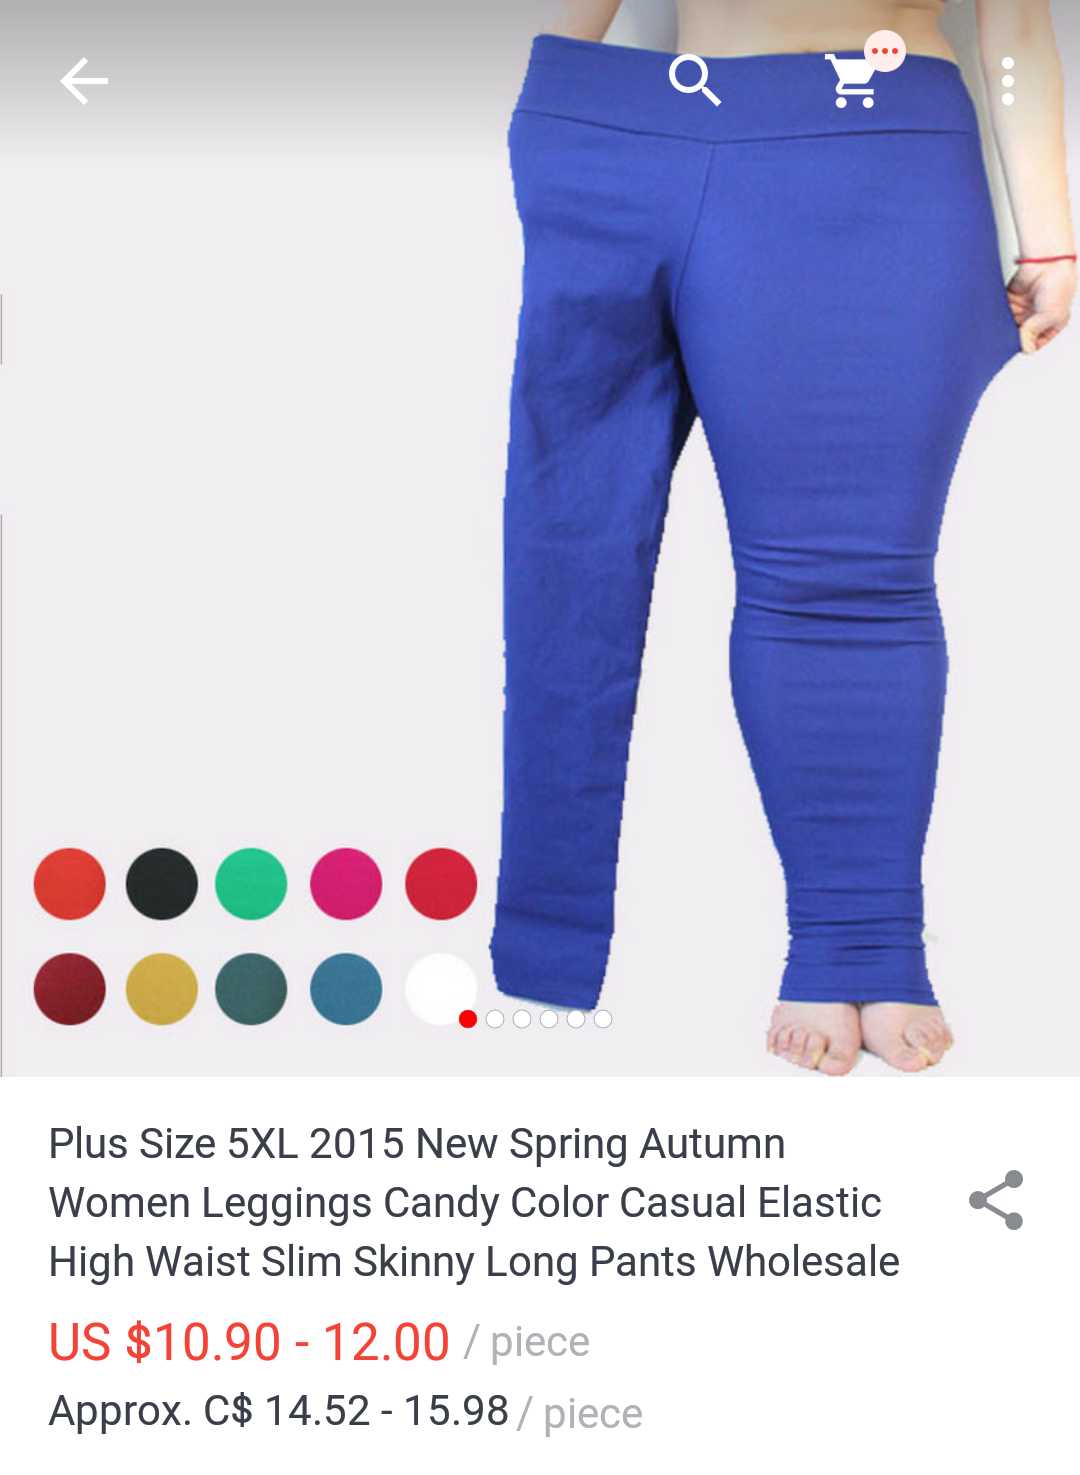 They couldn't find a plus size model for these plus size leggings so they improvised.